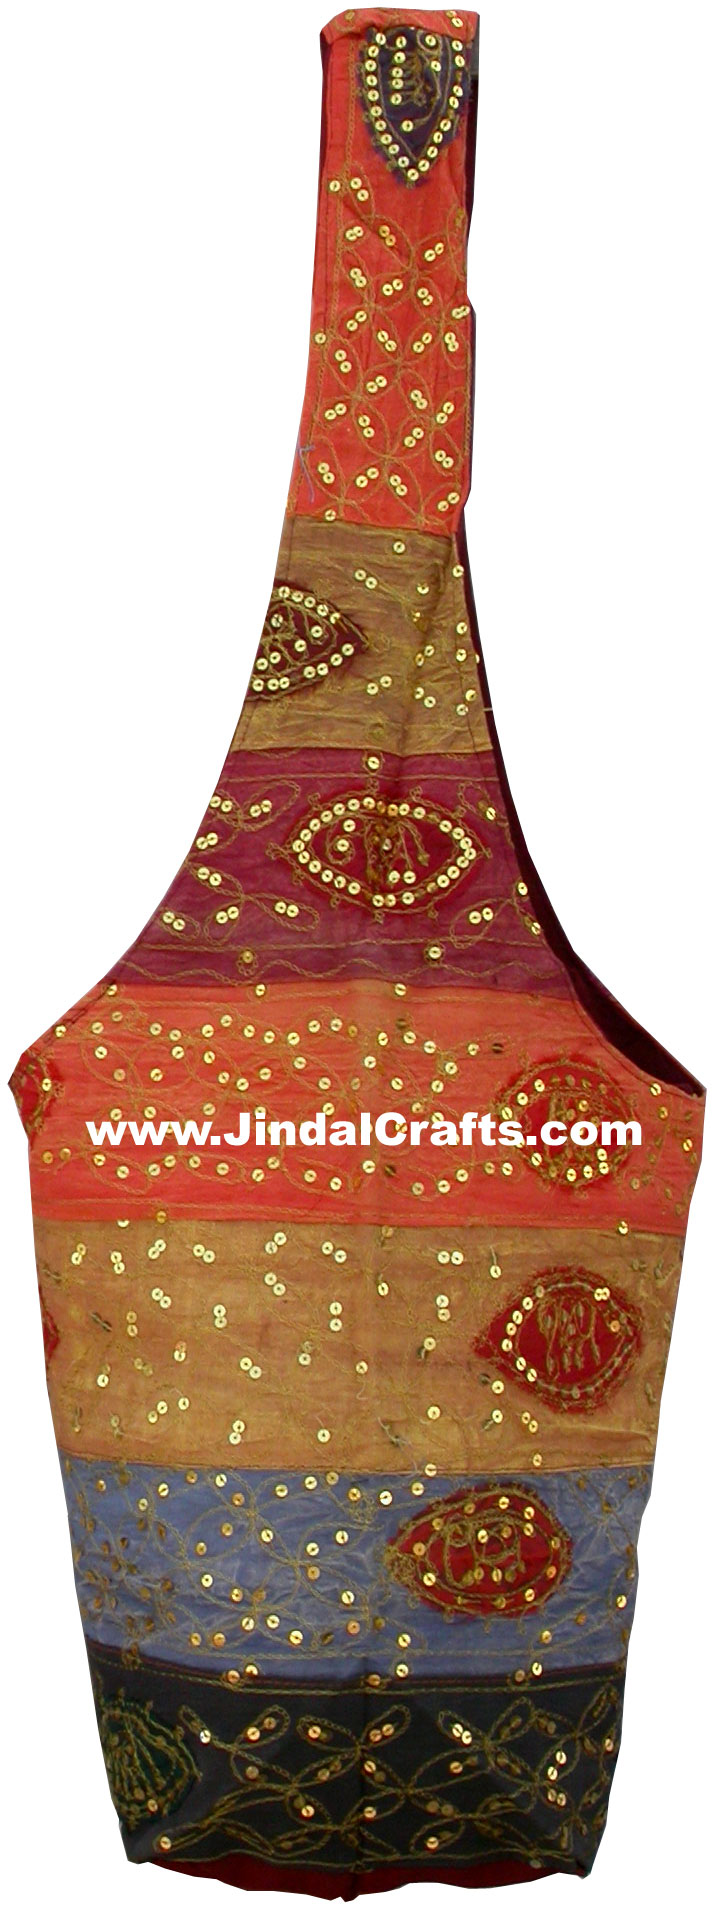 Colourful Hand Embroidered Sequin Handbag from India 100 % Cotton Fabric Art